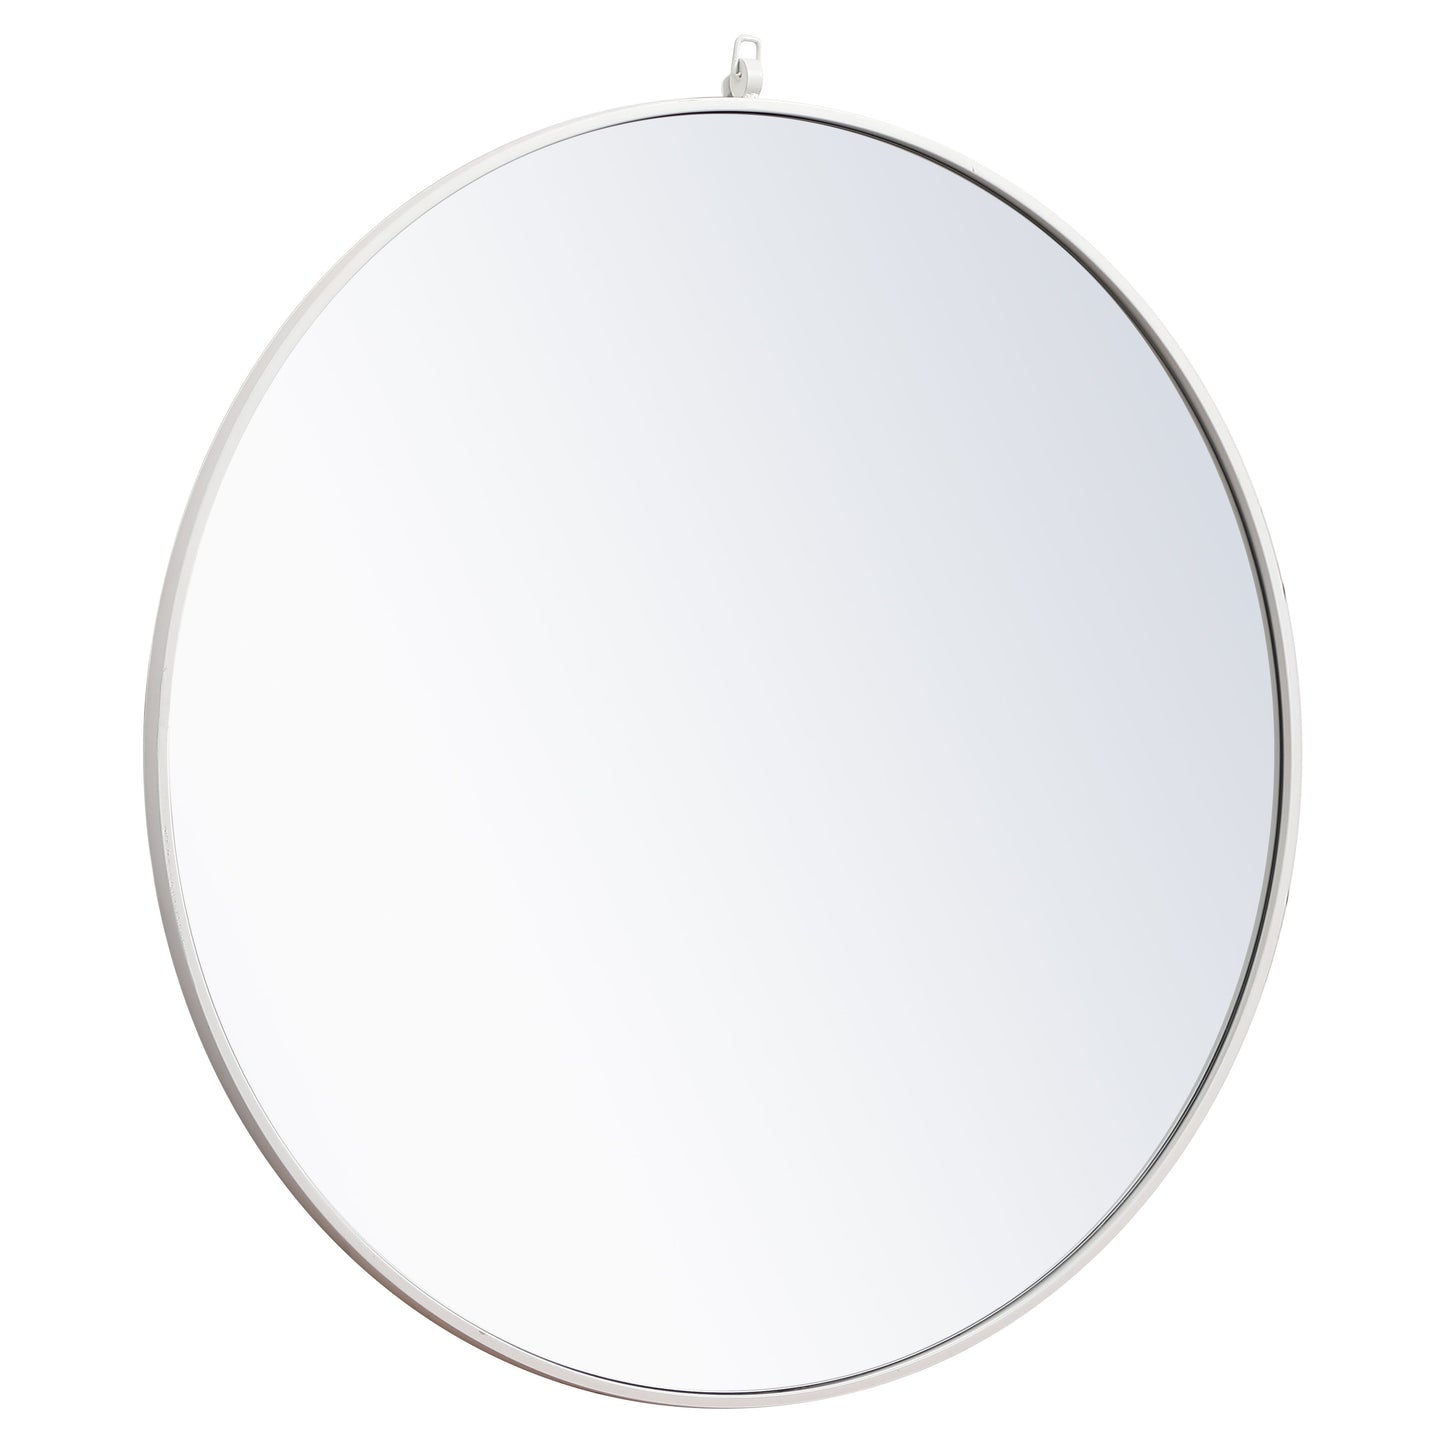 MR4061WH Rowan 36" x 36" Metal Framed Round Mirror with Decorative Hook in White